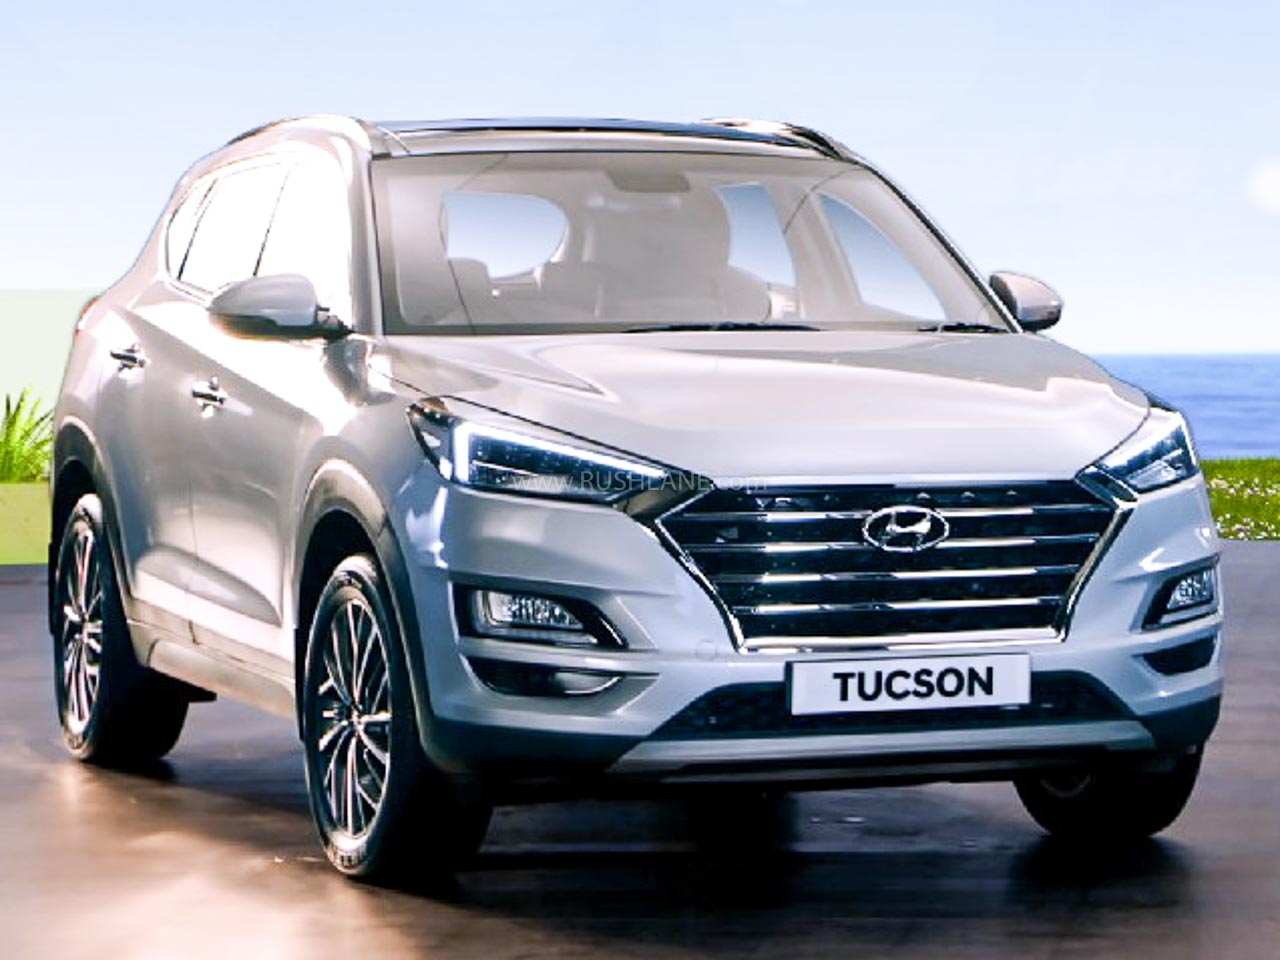 New Hyundai Tucson Facelift 2020 launch price Rs 22.3 lakh.